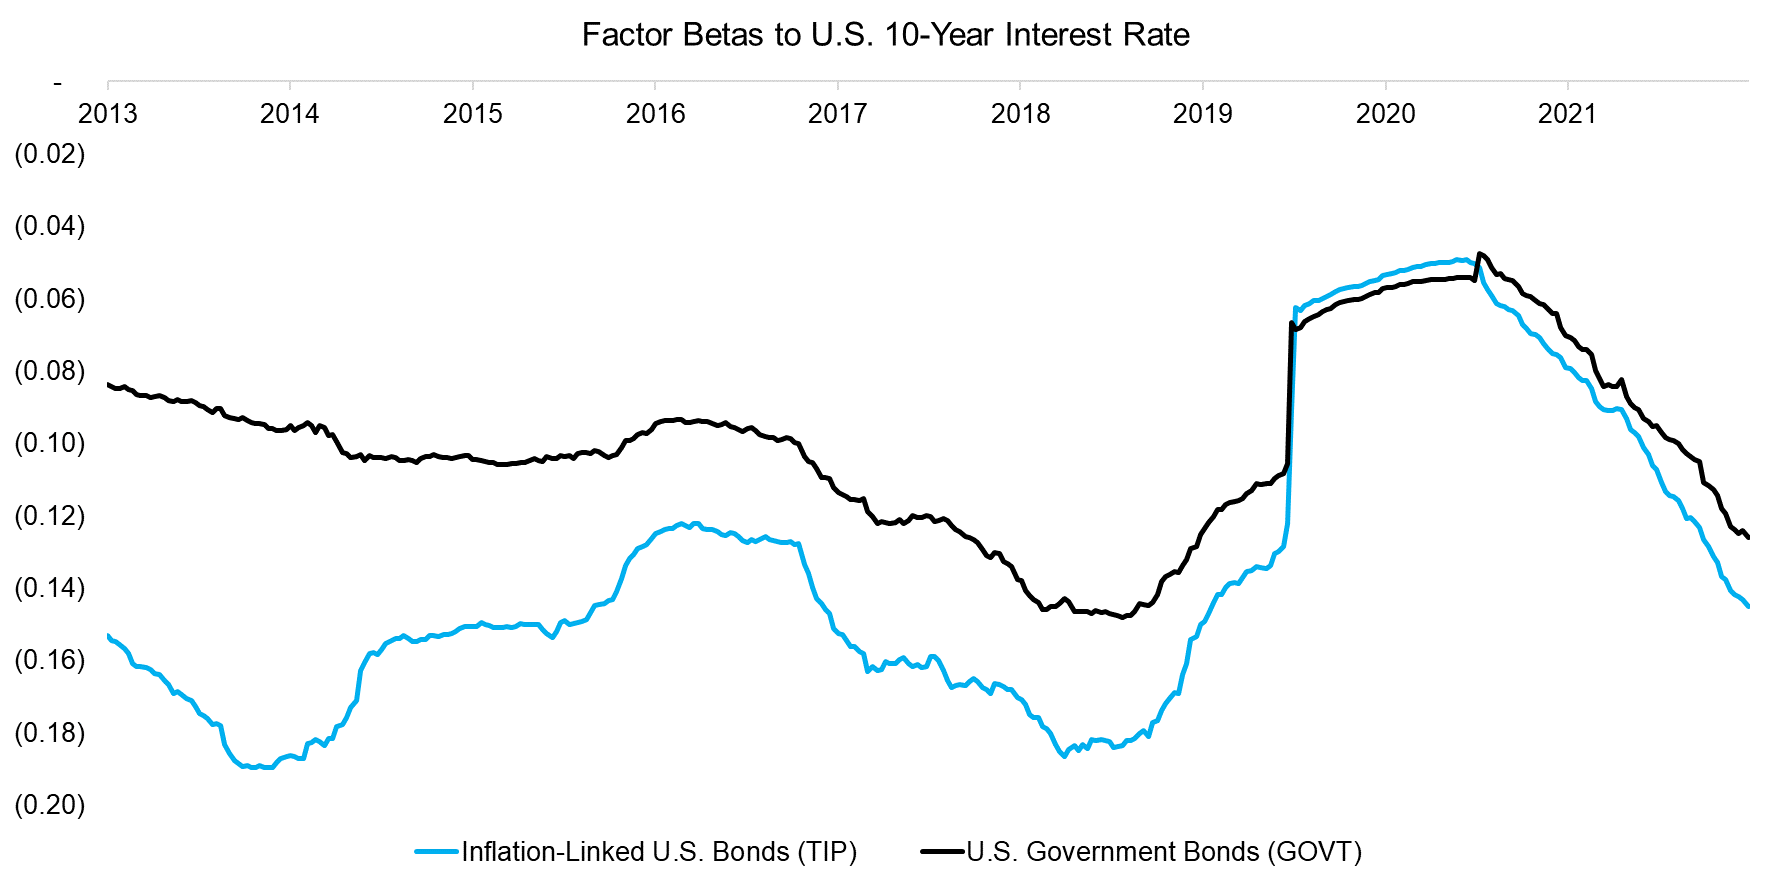 Factor Betas to U.S. 10-Year Interest Rate